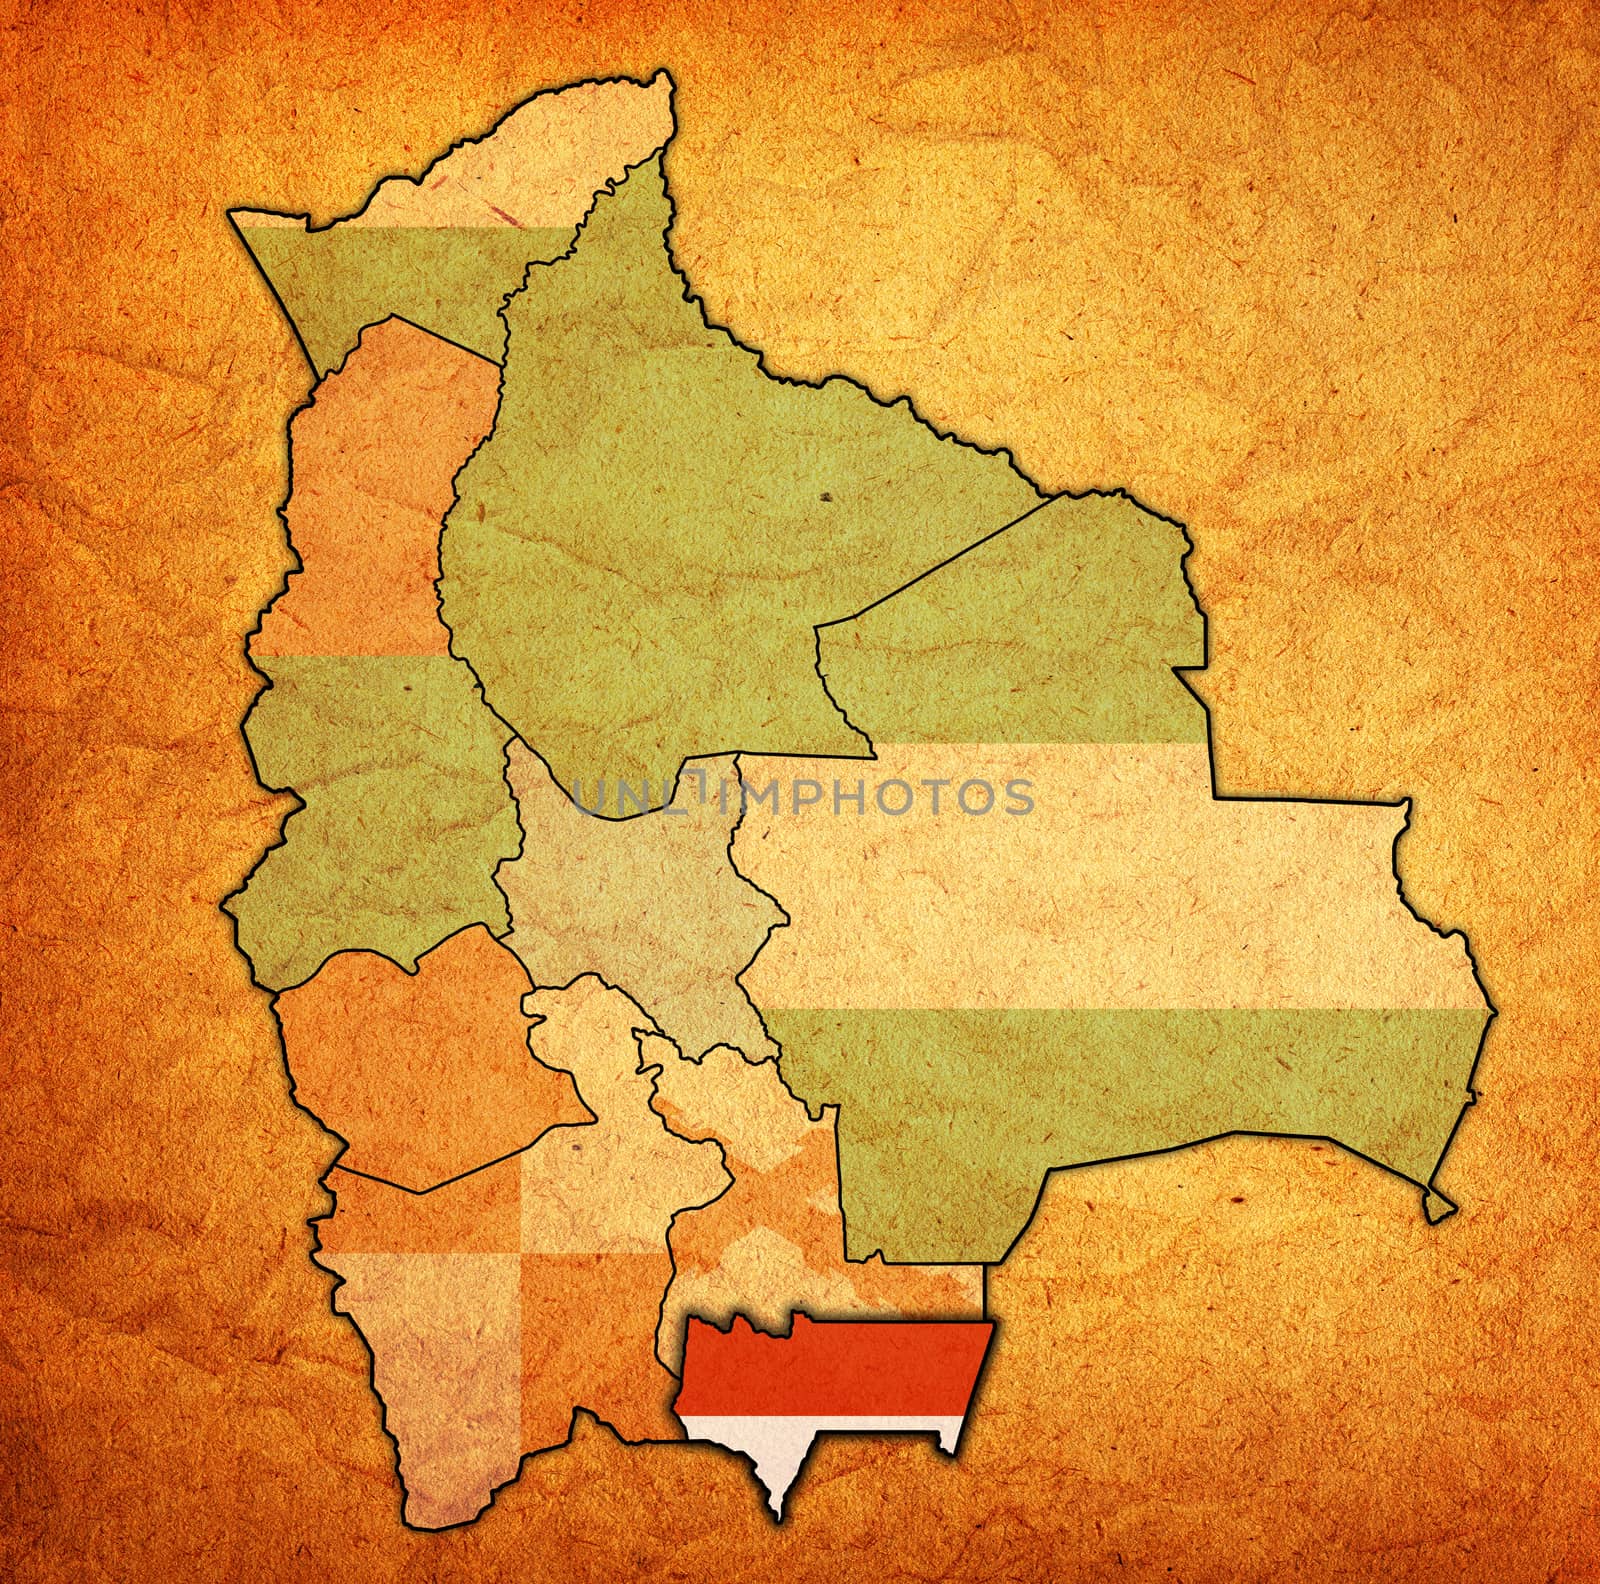 territory of Tarija region on administration map of Bolivia by michal812